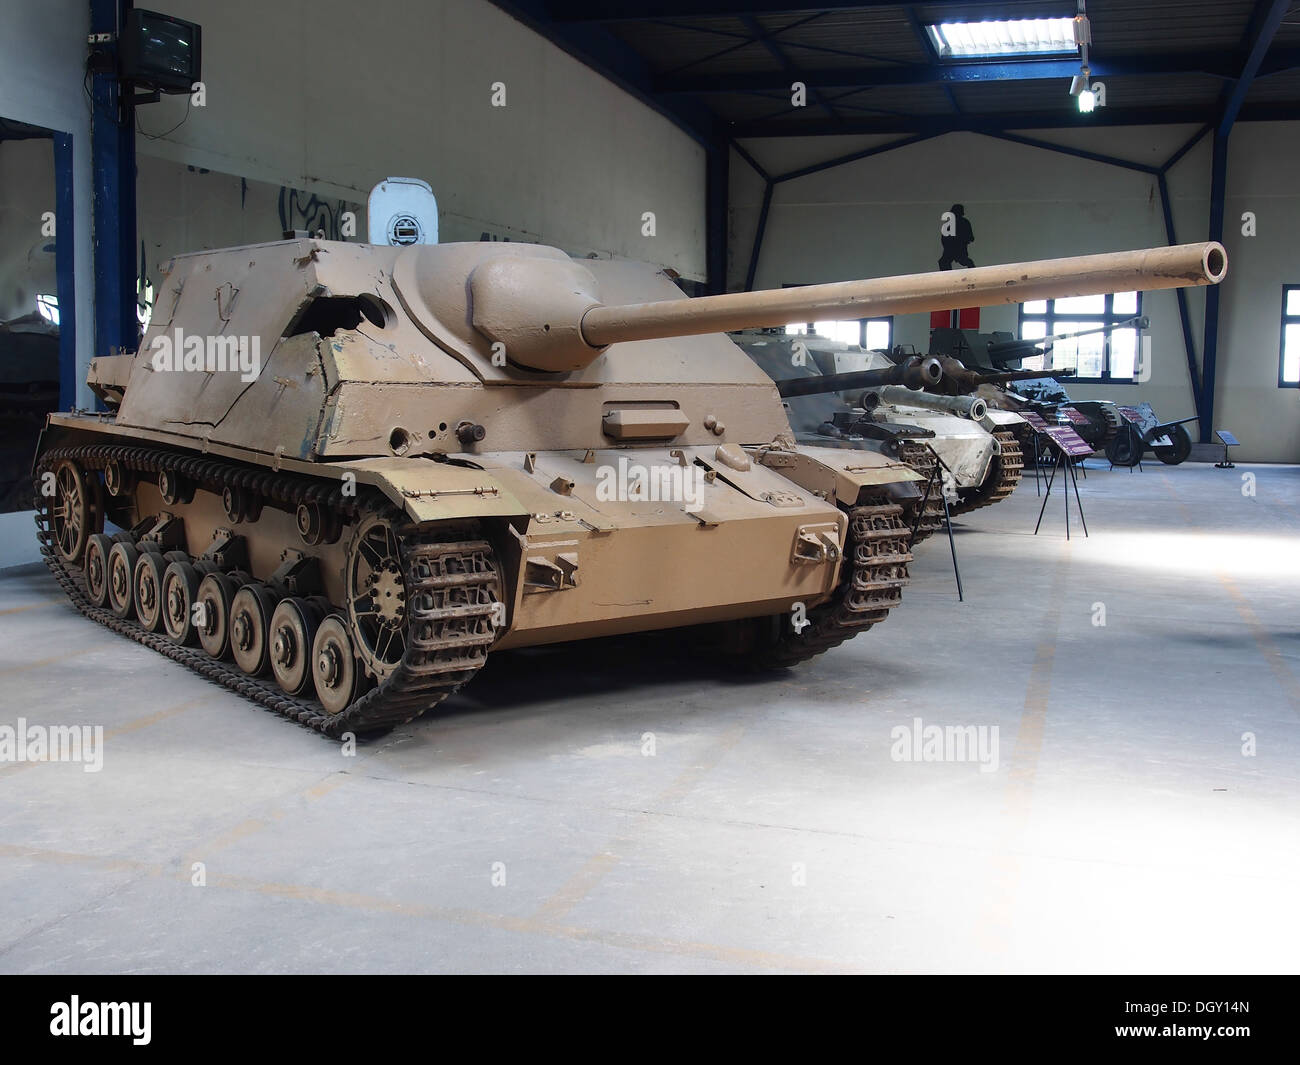 Sd.Kfz. 162-1 Jagdpanzer IV-70(A) in the tank museum, Saumur, France, pic-1. 162-1 Jagdpanzer IV-70(A) in the tank museum, Saumur, France, pic- Sd.Kfz. 162/1 Jagdpanzer IV/70(A) Stock Photo